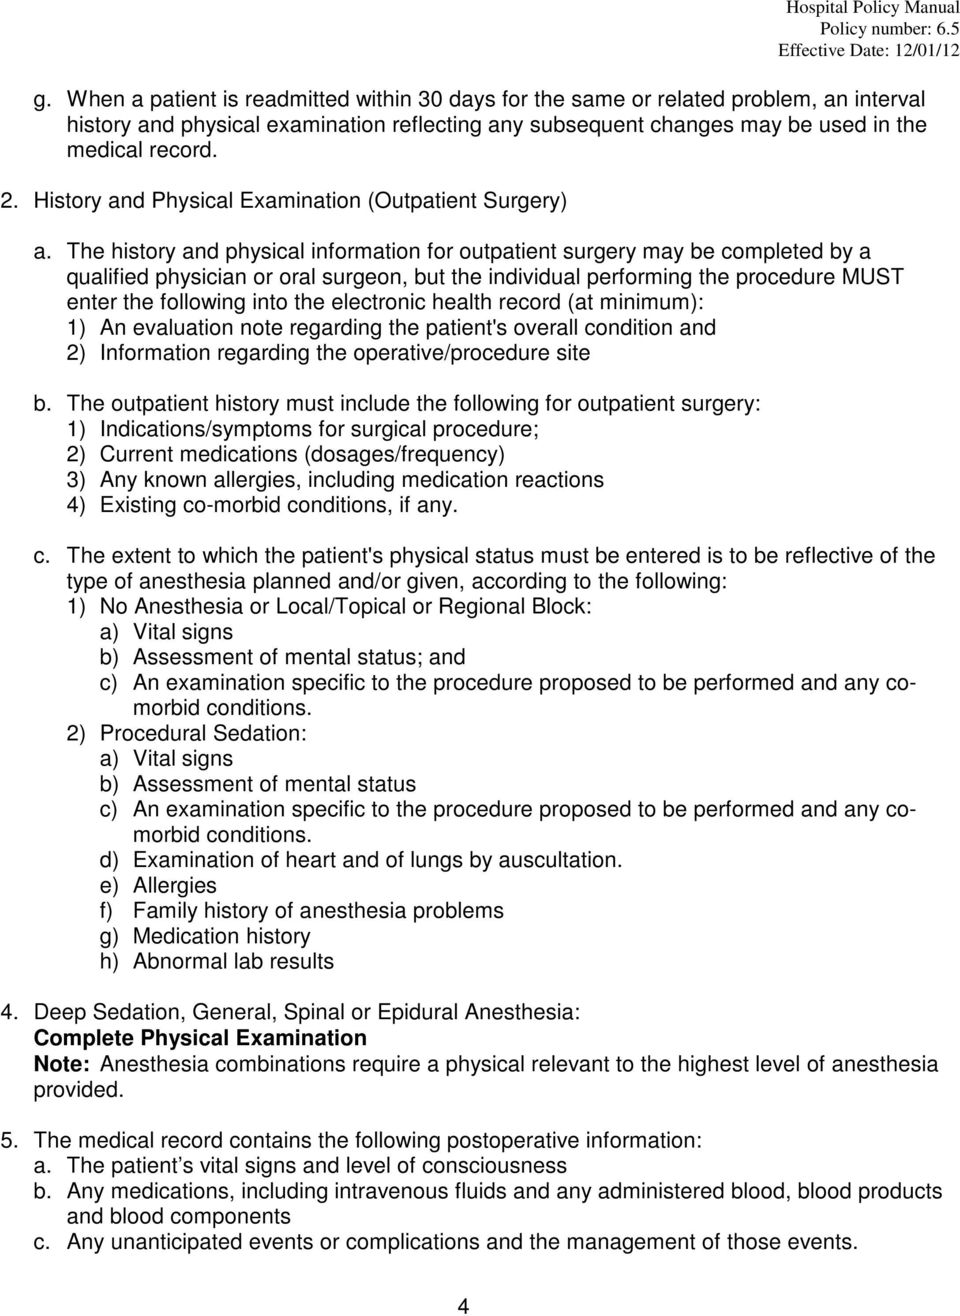 The history and physical information for outpatient surgery may be completed by a qualified physician or oral surgeon, but the individual performing the procedure MUST enter the following into the